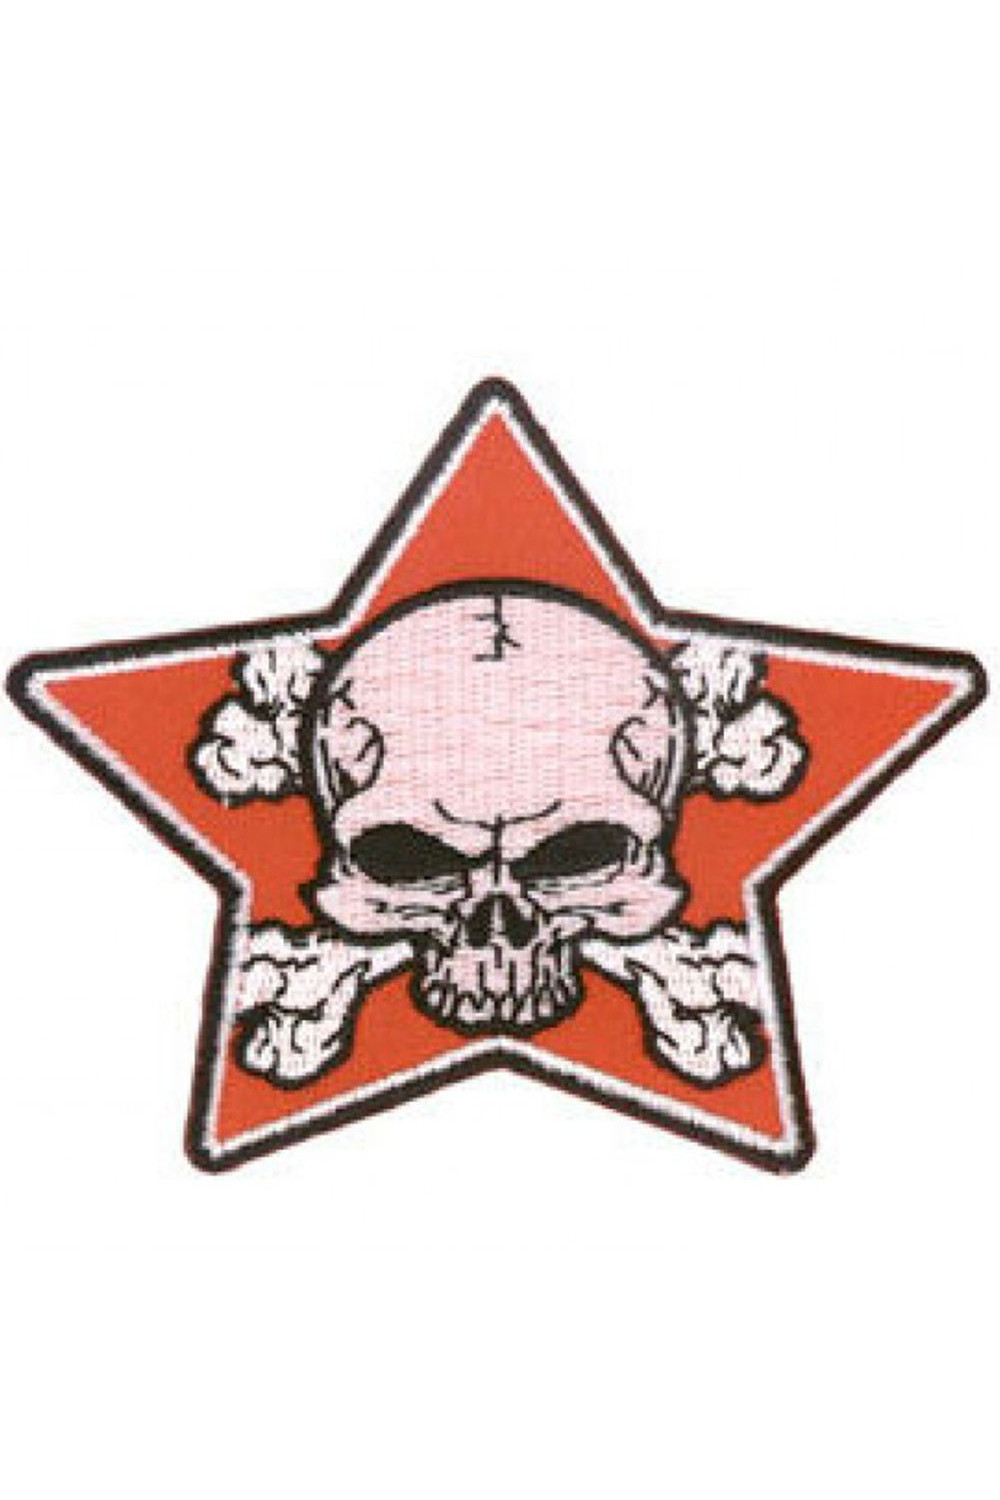 Aftermath Skull Patch 3.5"